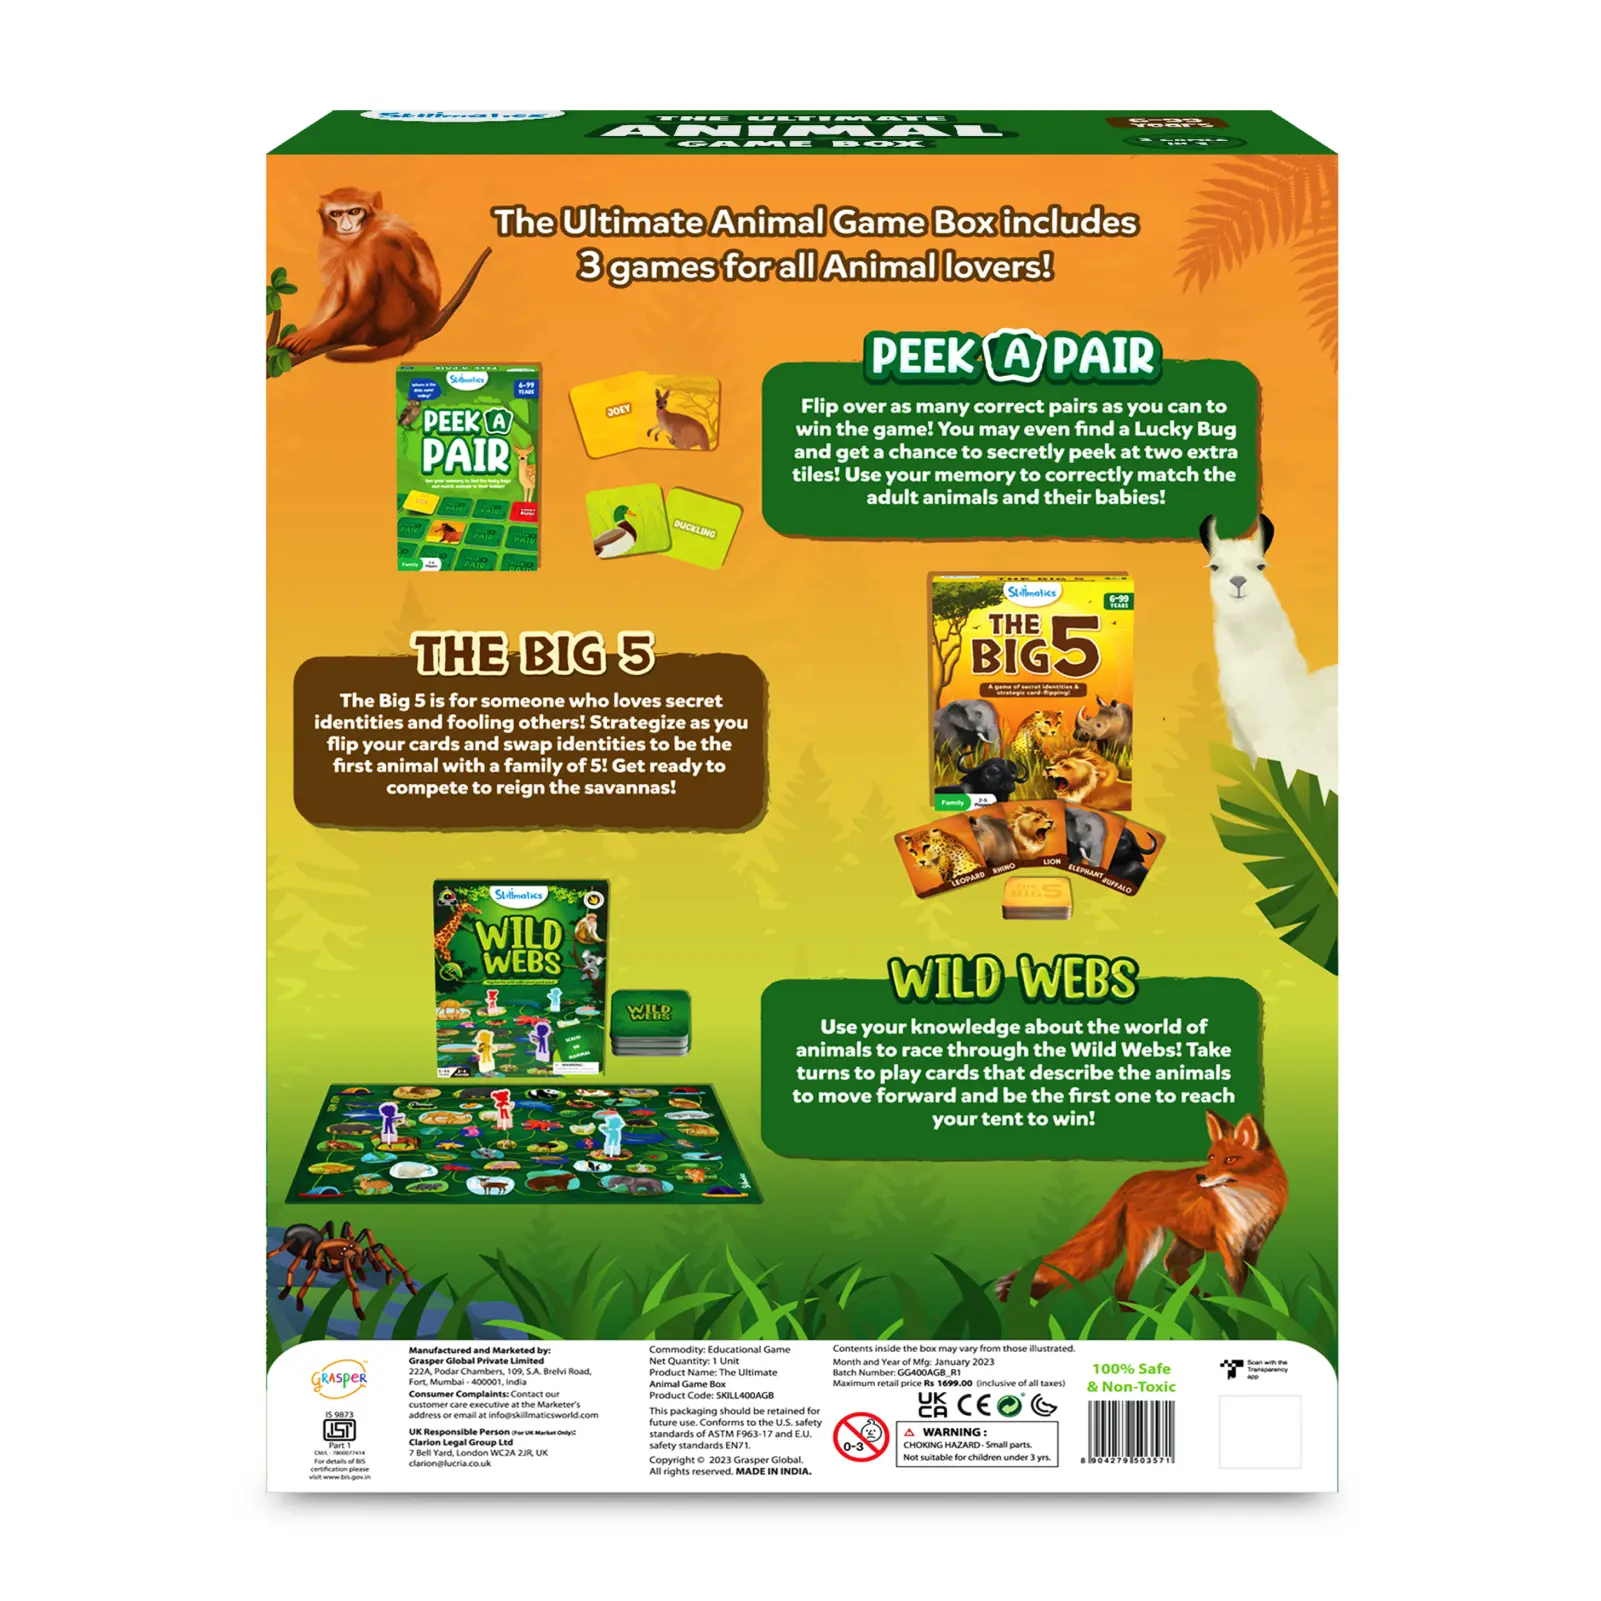 The Ultimate Animal Game Box | Family Friendly Games (ages 6+)